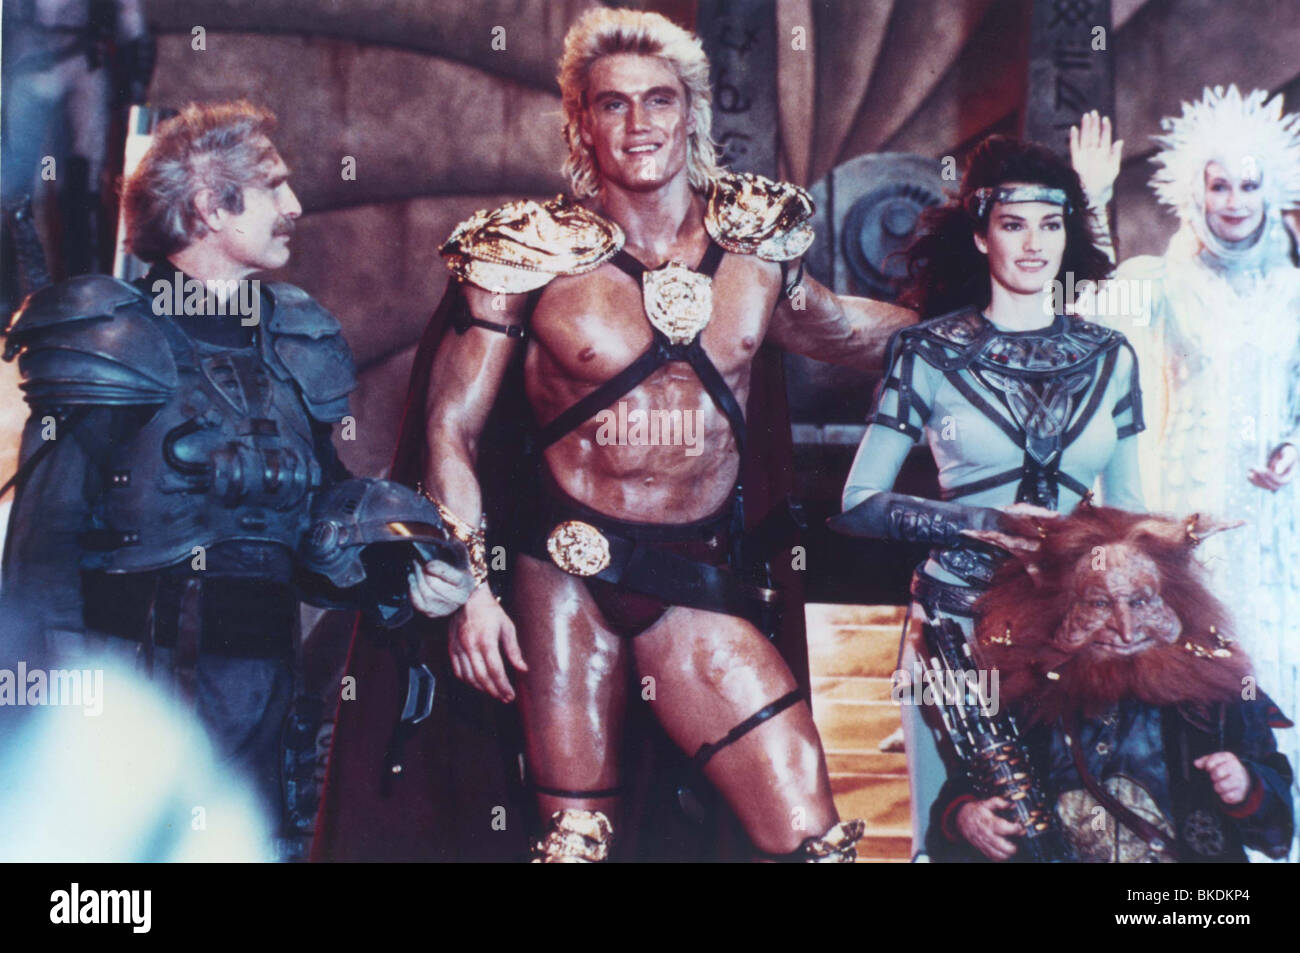 MASTERS OF THE UNIVERSE (1987) JON CYPHER, DOLPH LUNDGREN, CHELSEA FIELD, BILLY BARTY, CHRISTINA PICKLES MOU 005CP Stock Photo